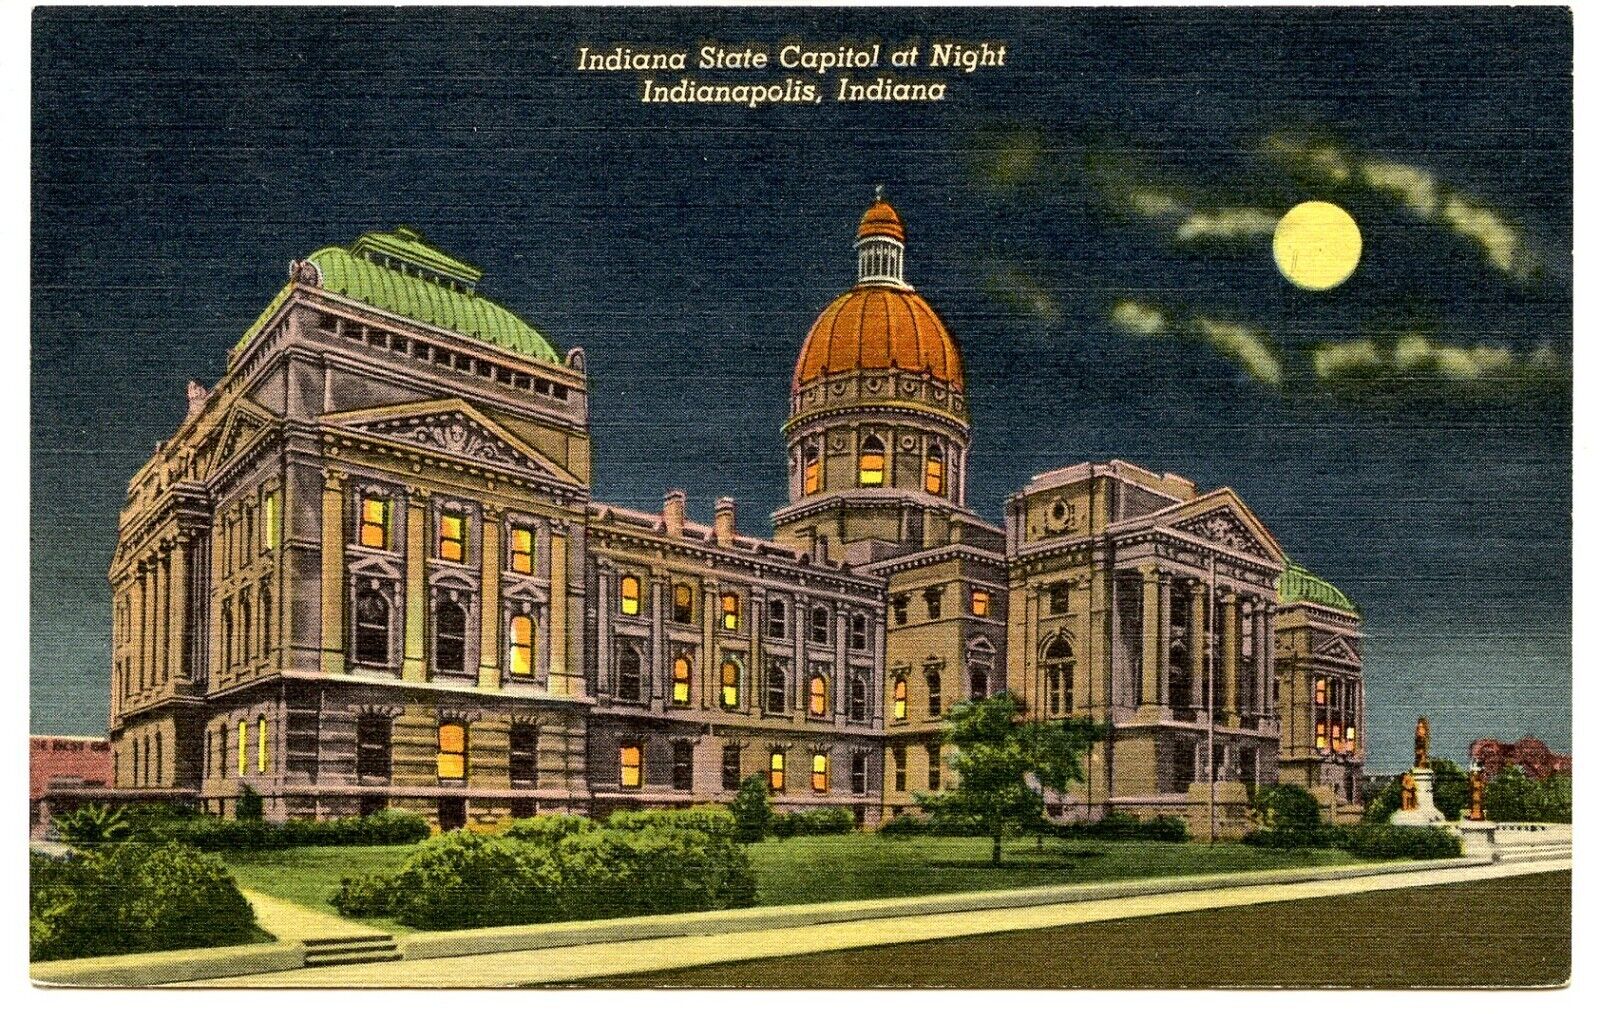 Indiana State Capital Night Indianapolis Indiana Vintage Linen Postcard Unposted